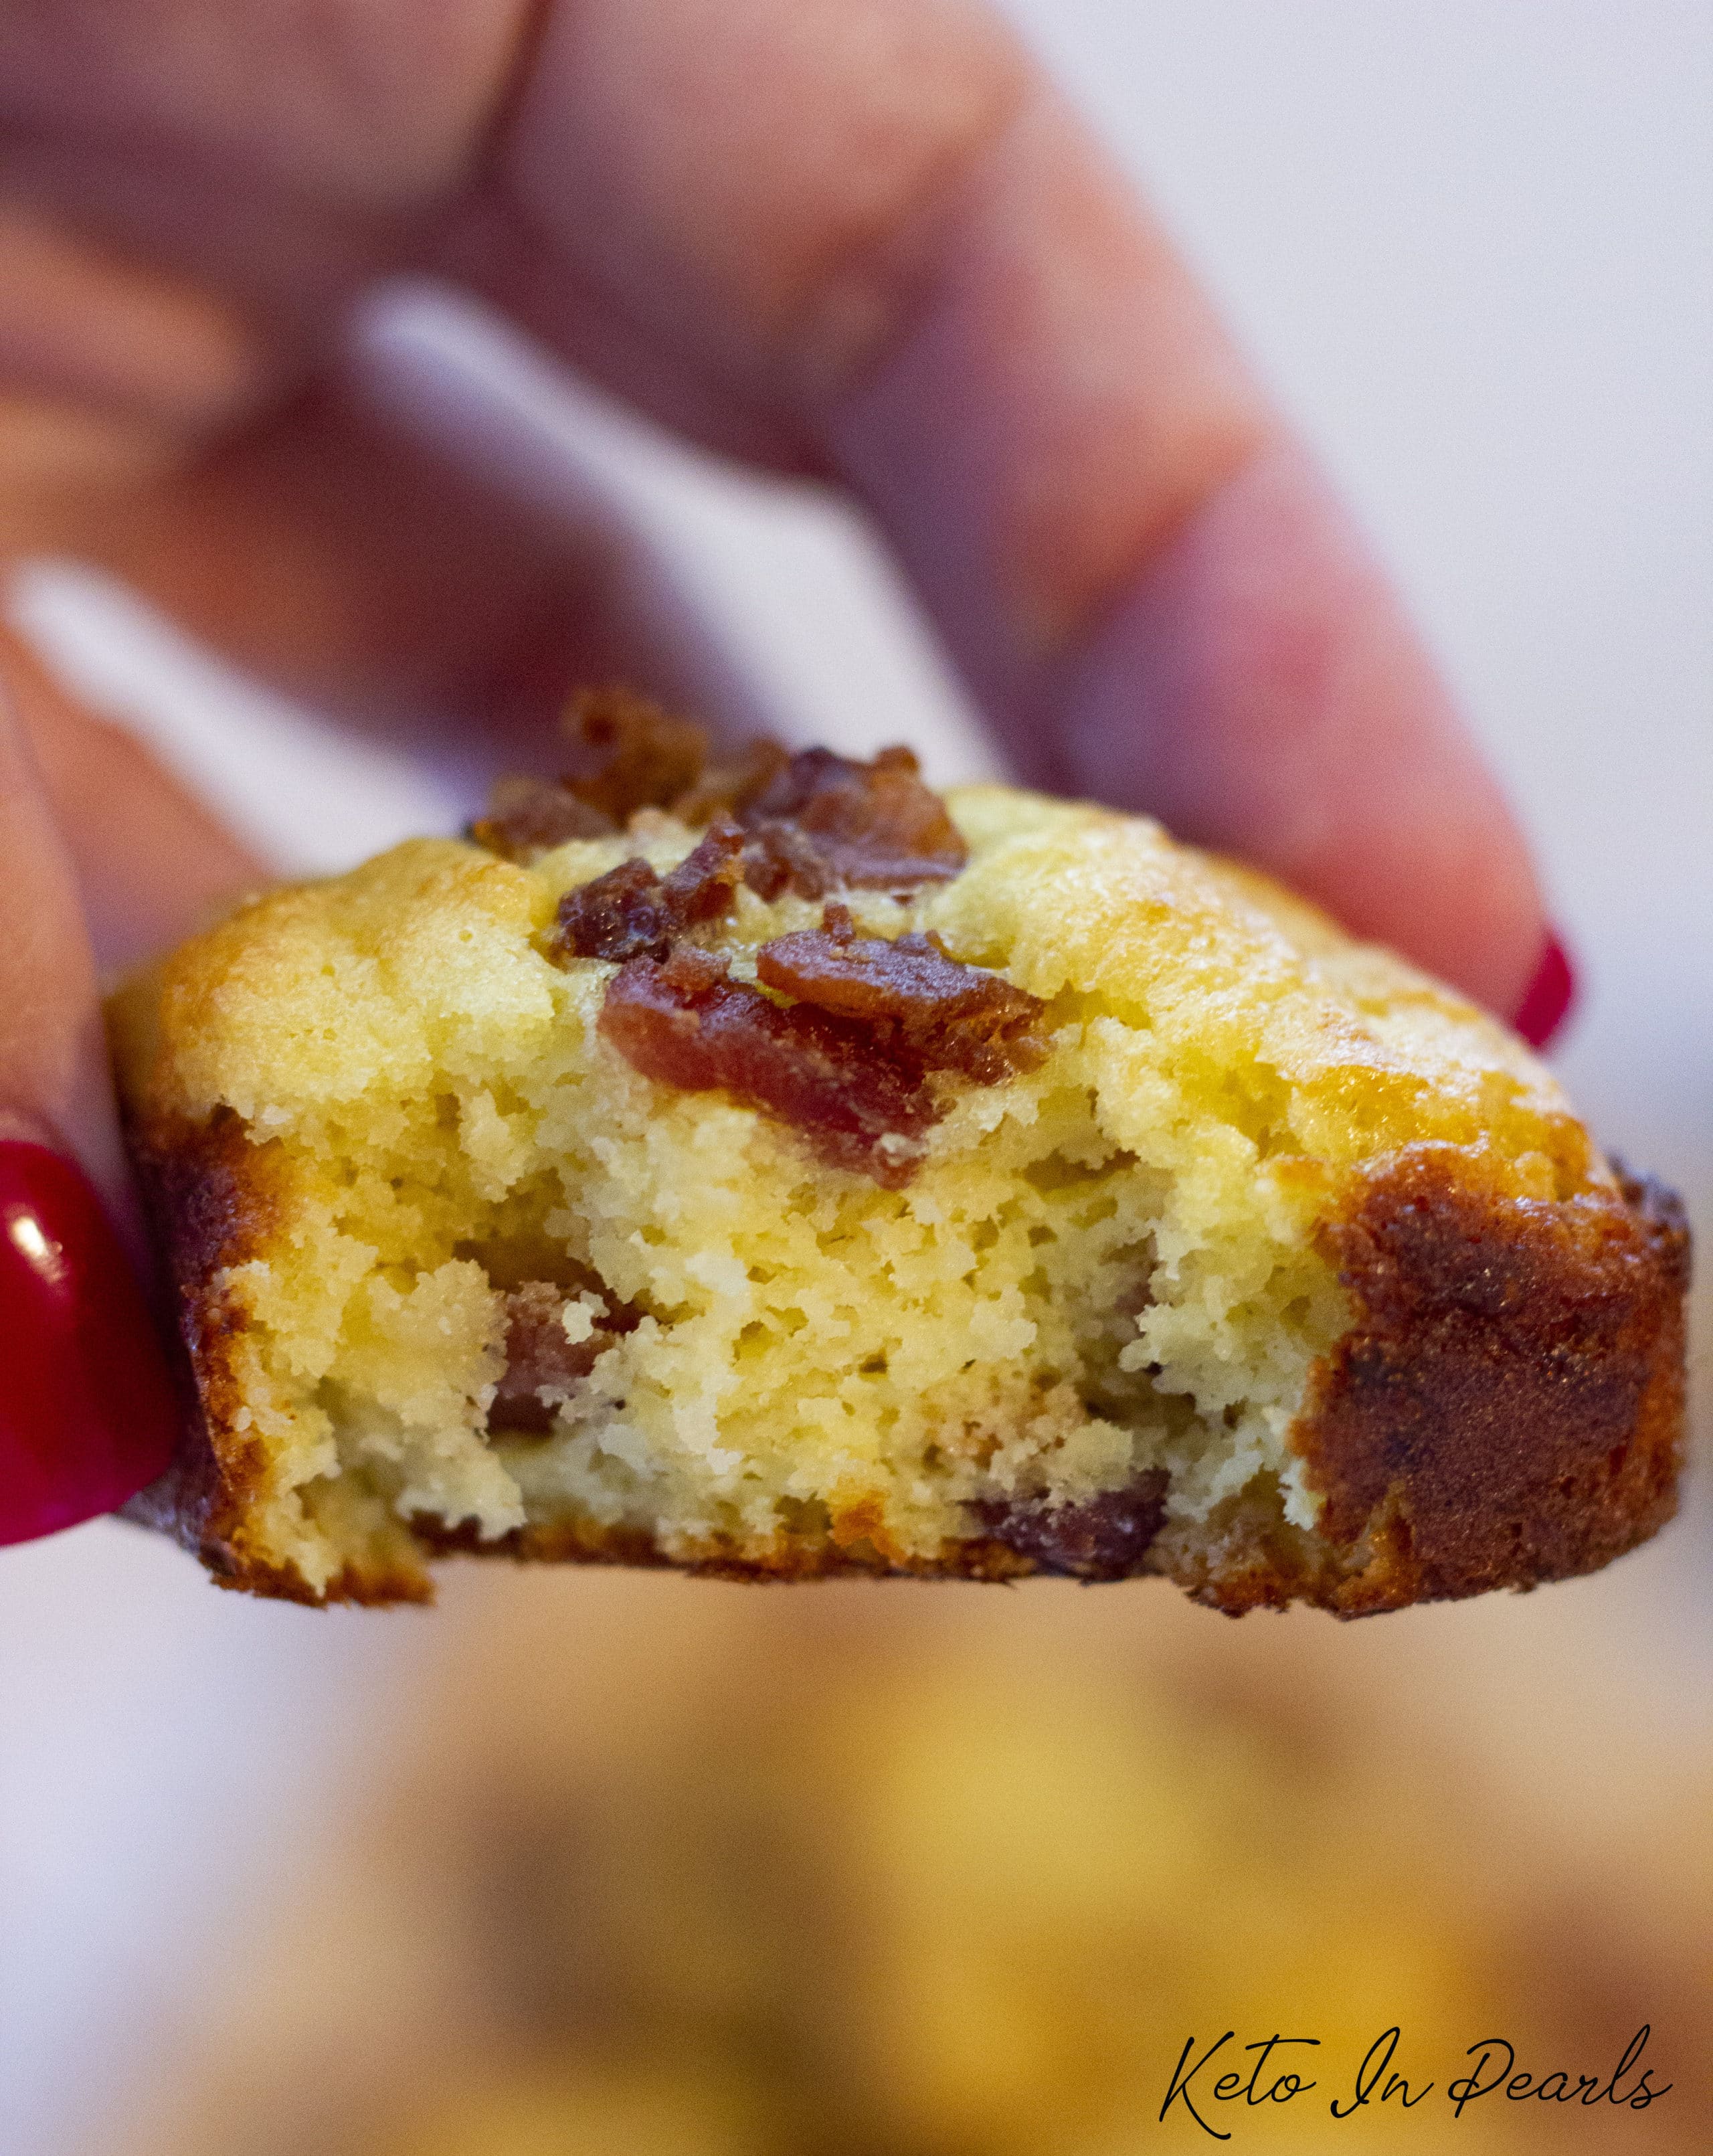 A sweet and salty maple keto bacon cornbread that is grain free, gluten free, and keto friendly. Only 2 net carbs per muffin. The best sweet keto cornbread!